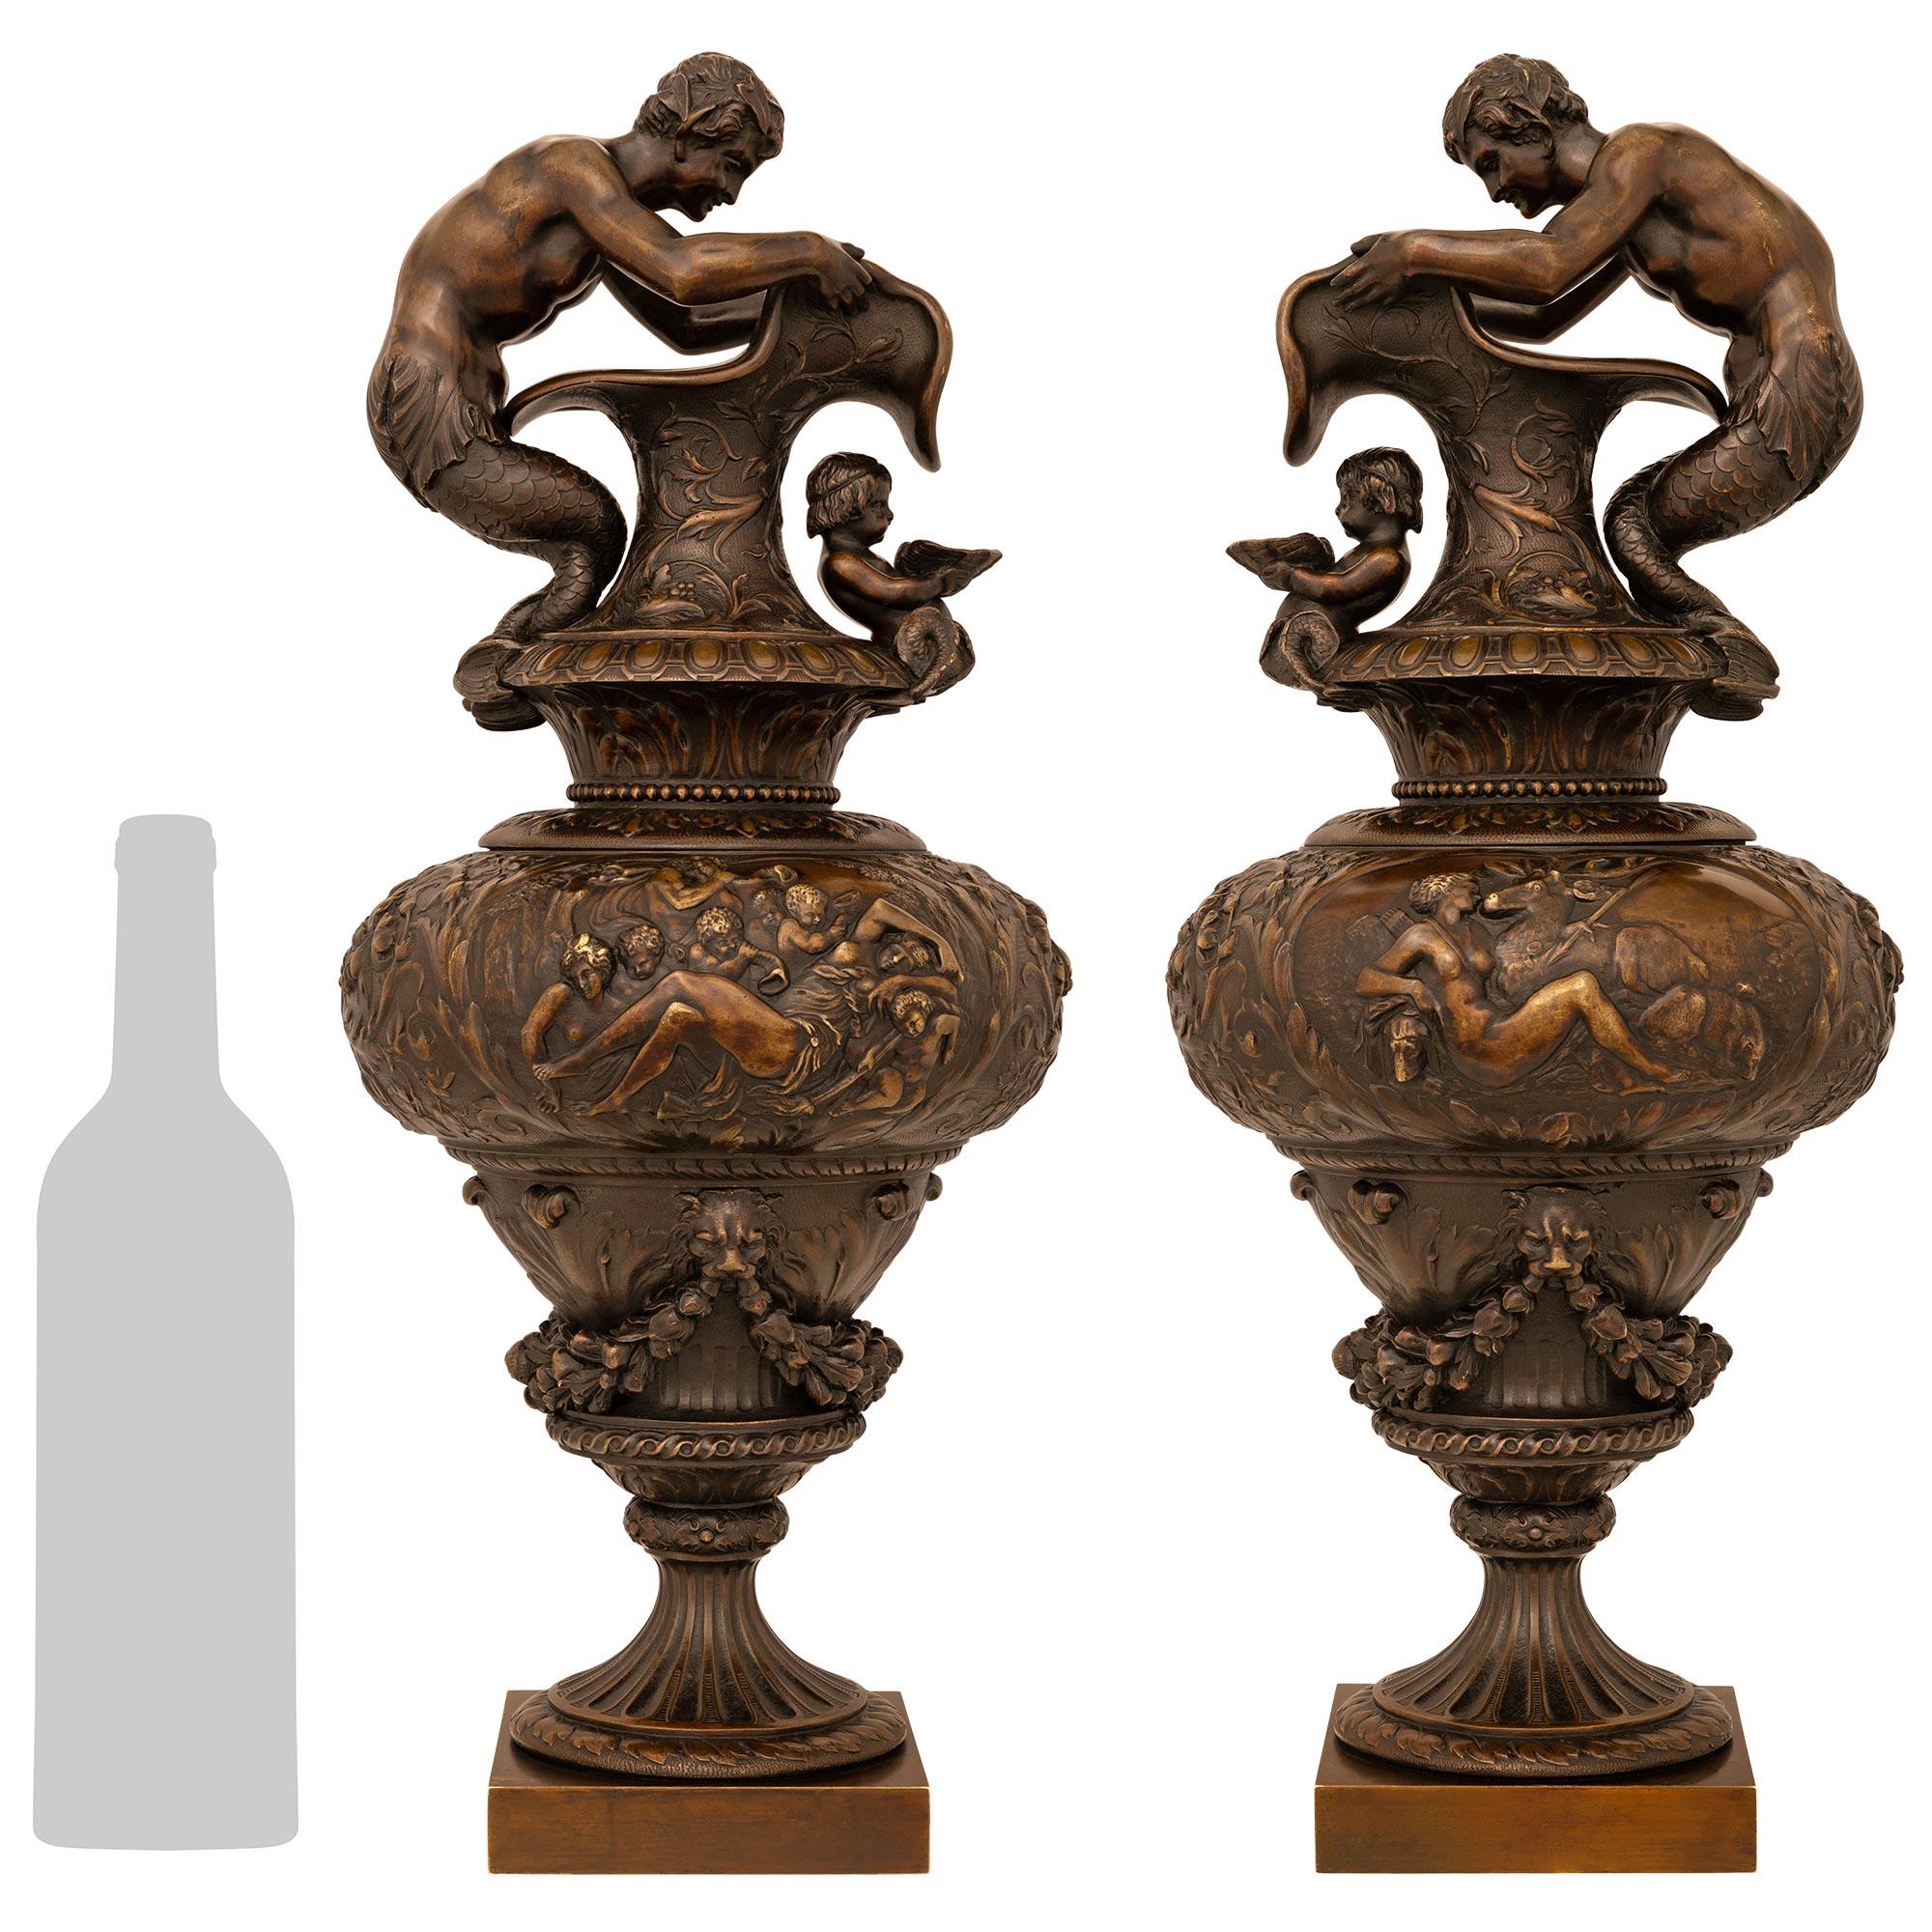 A stunning and most handsome pair of French 19th century Renaissance st. patinated Bronze ewers/urns. Each ewer is raised by a square base below a fluted socle decorated with a foliate band at the center and spiral band above. The body of each ewer